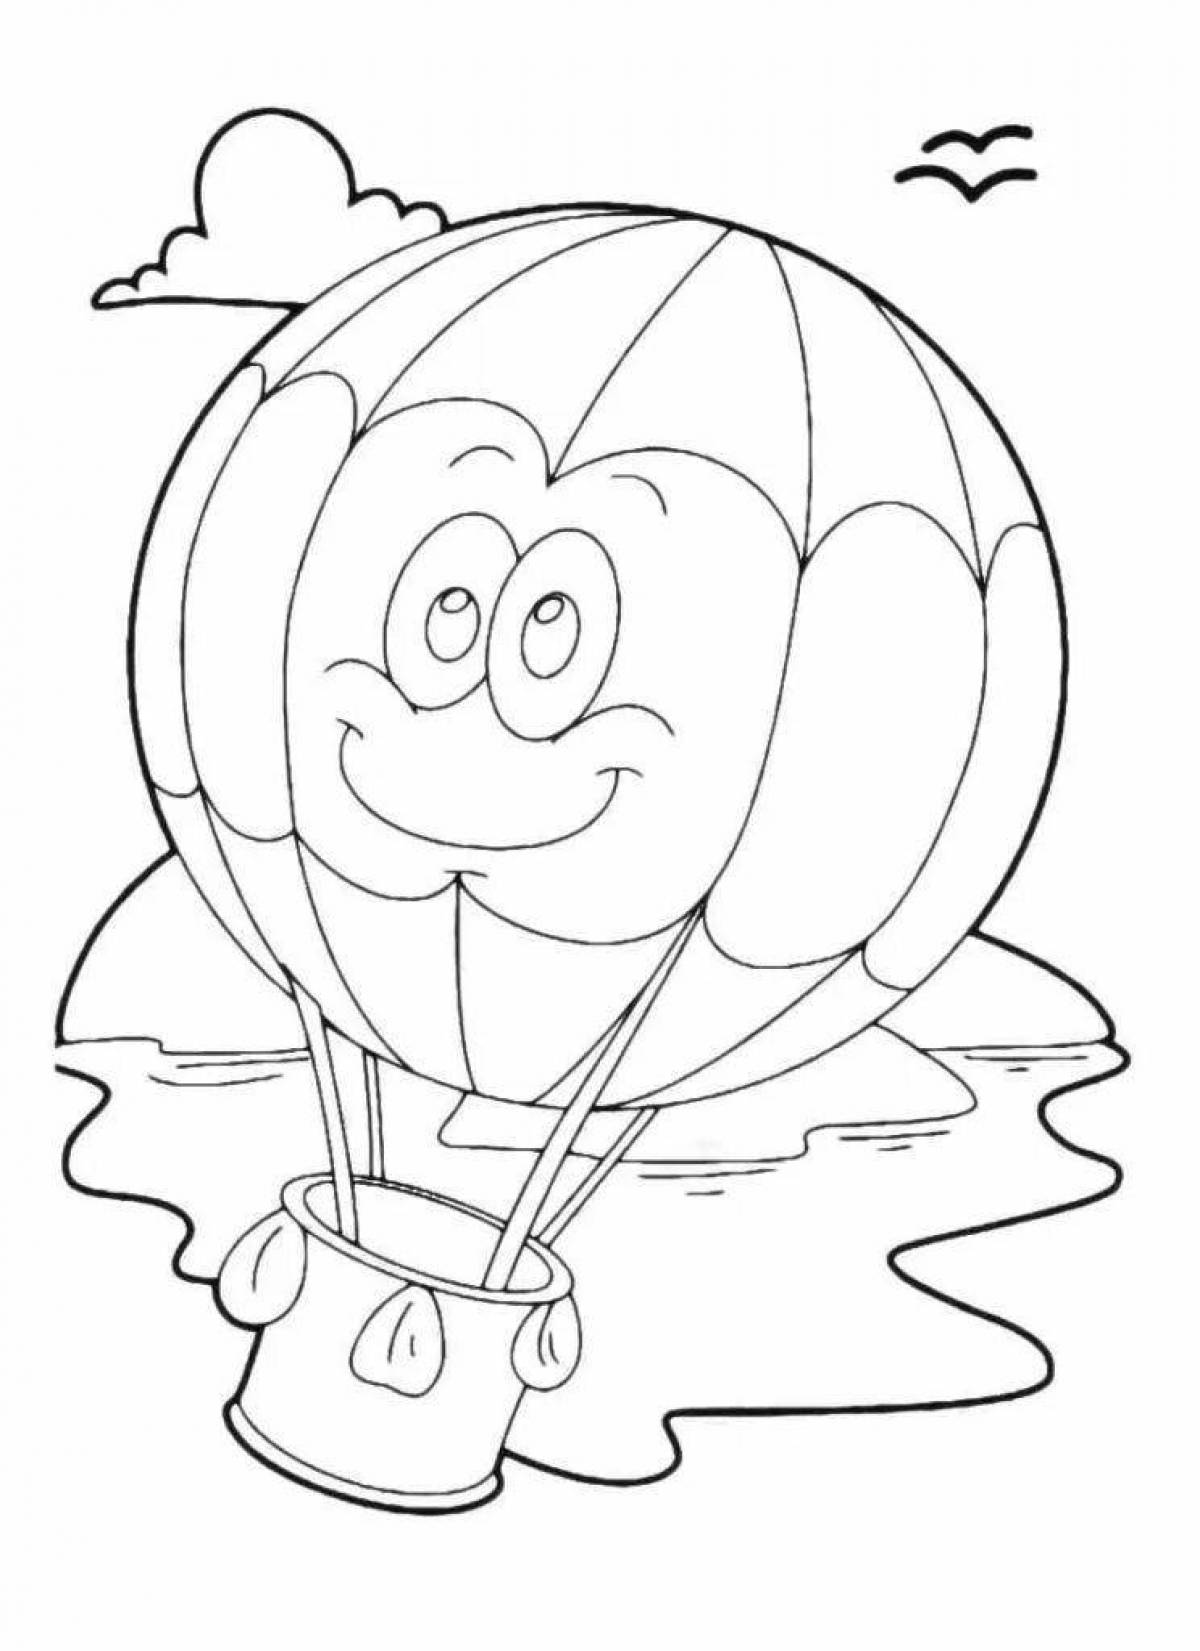 Amazing balloon coloring book for kids